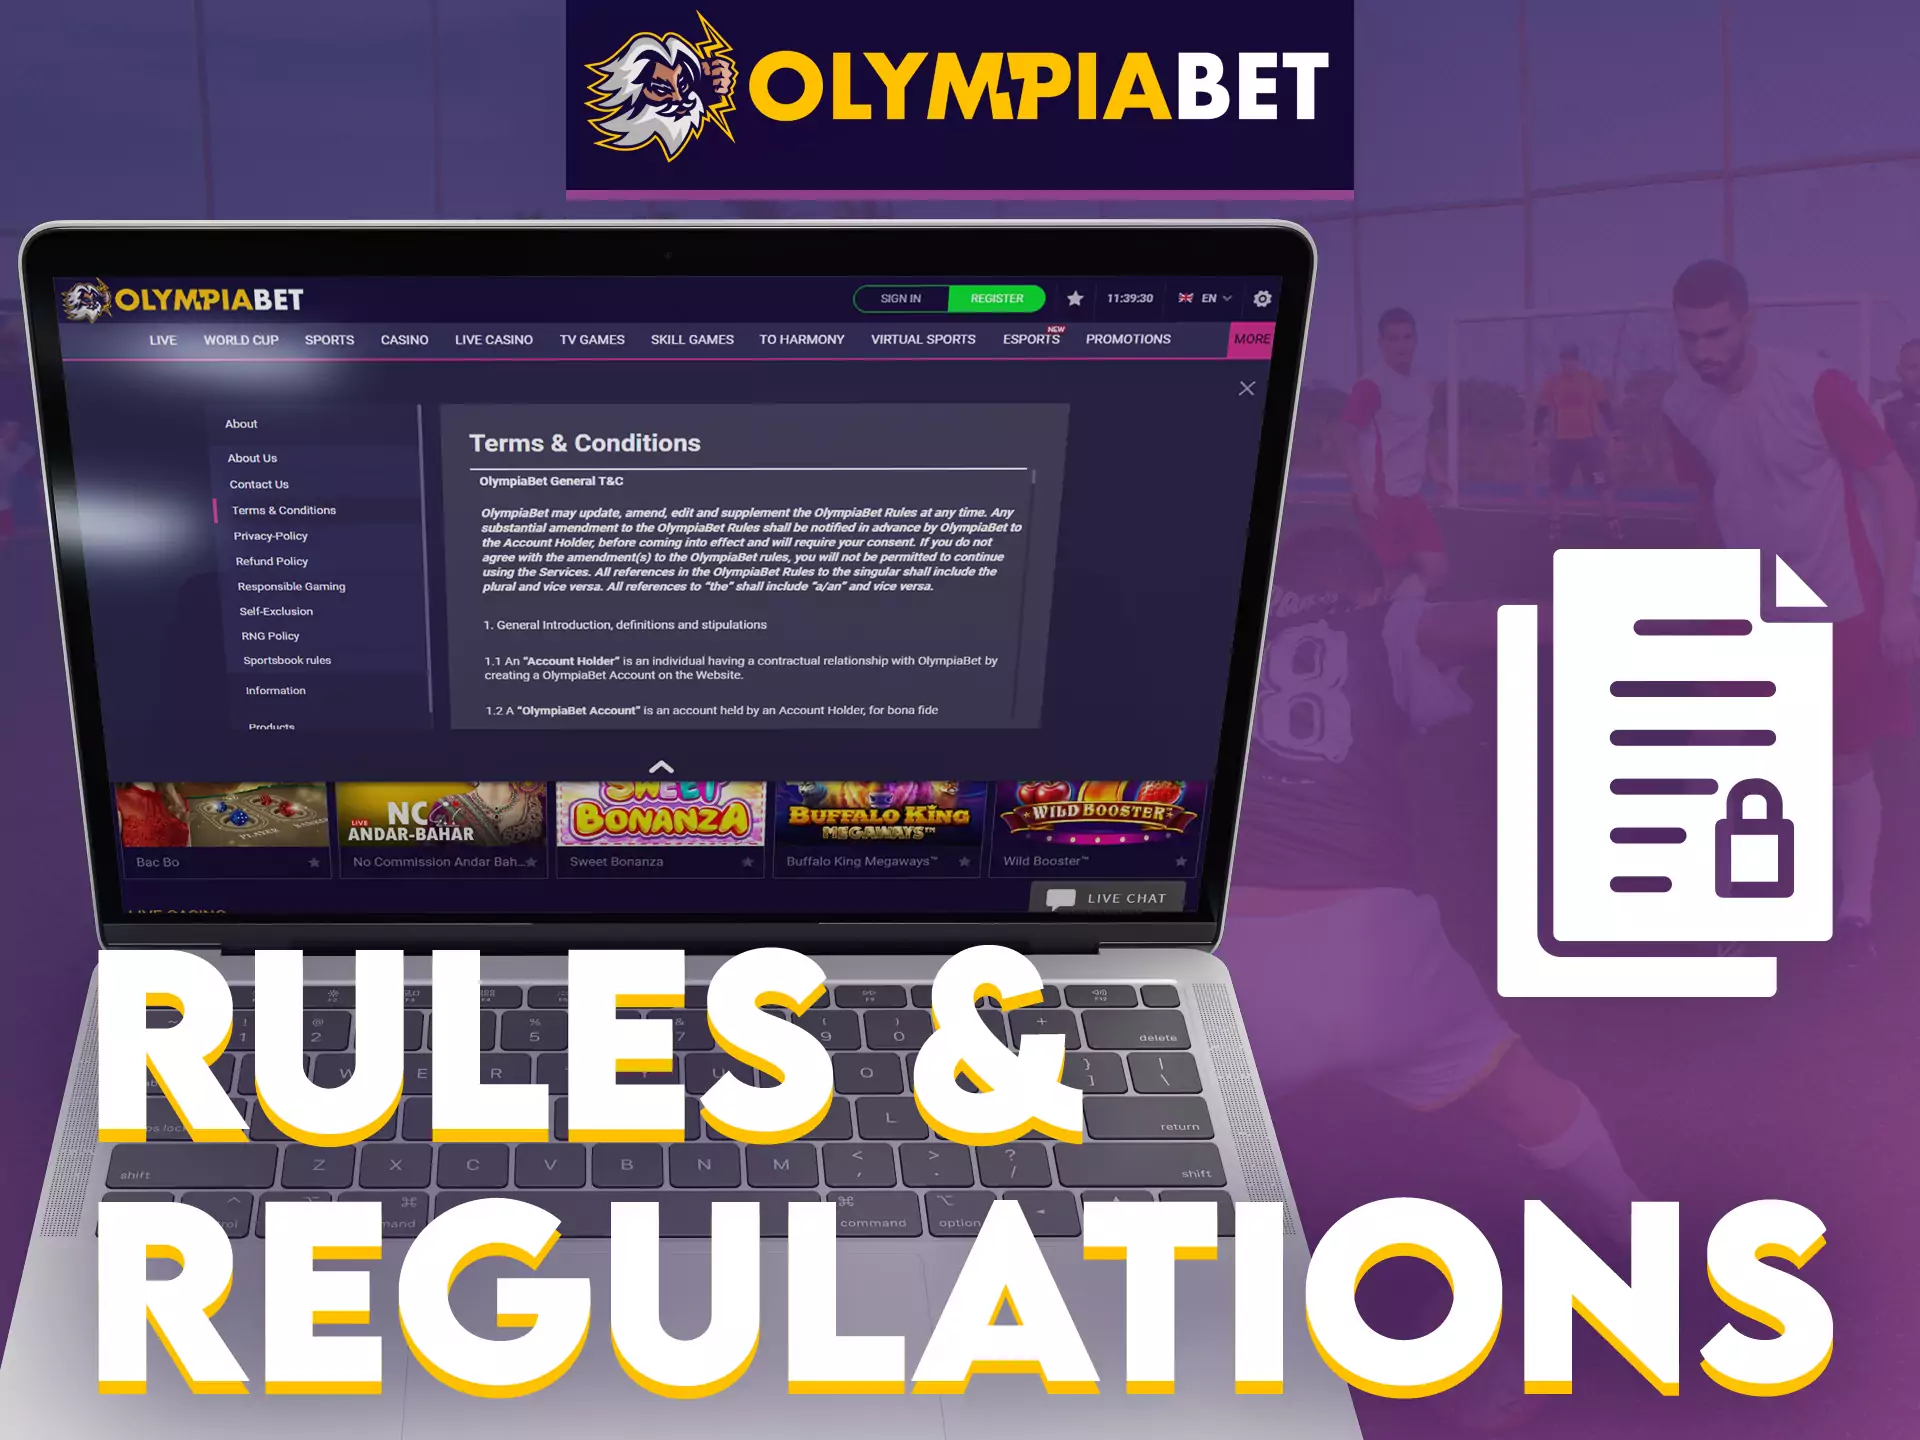 Learn the rules and regulations of OlympiaBet, use the service comfortably.